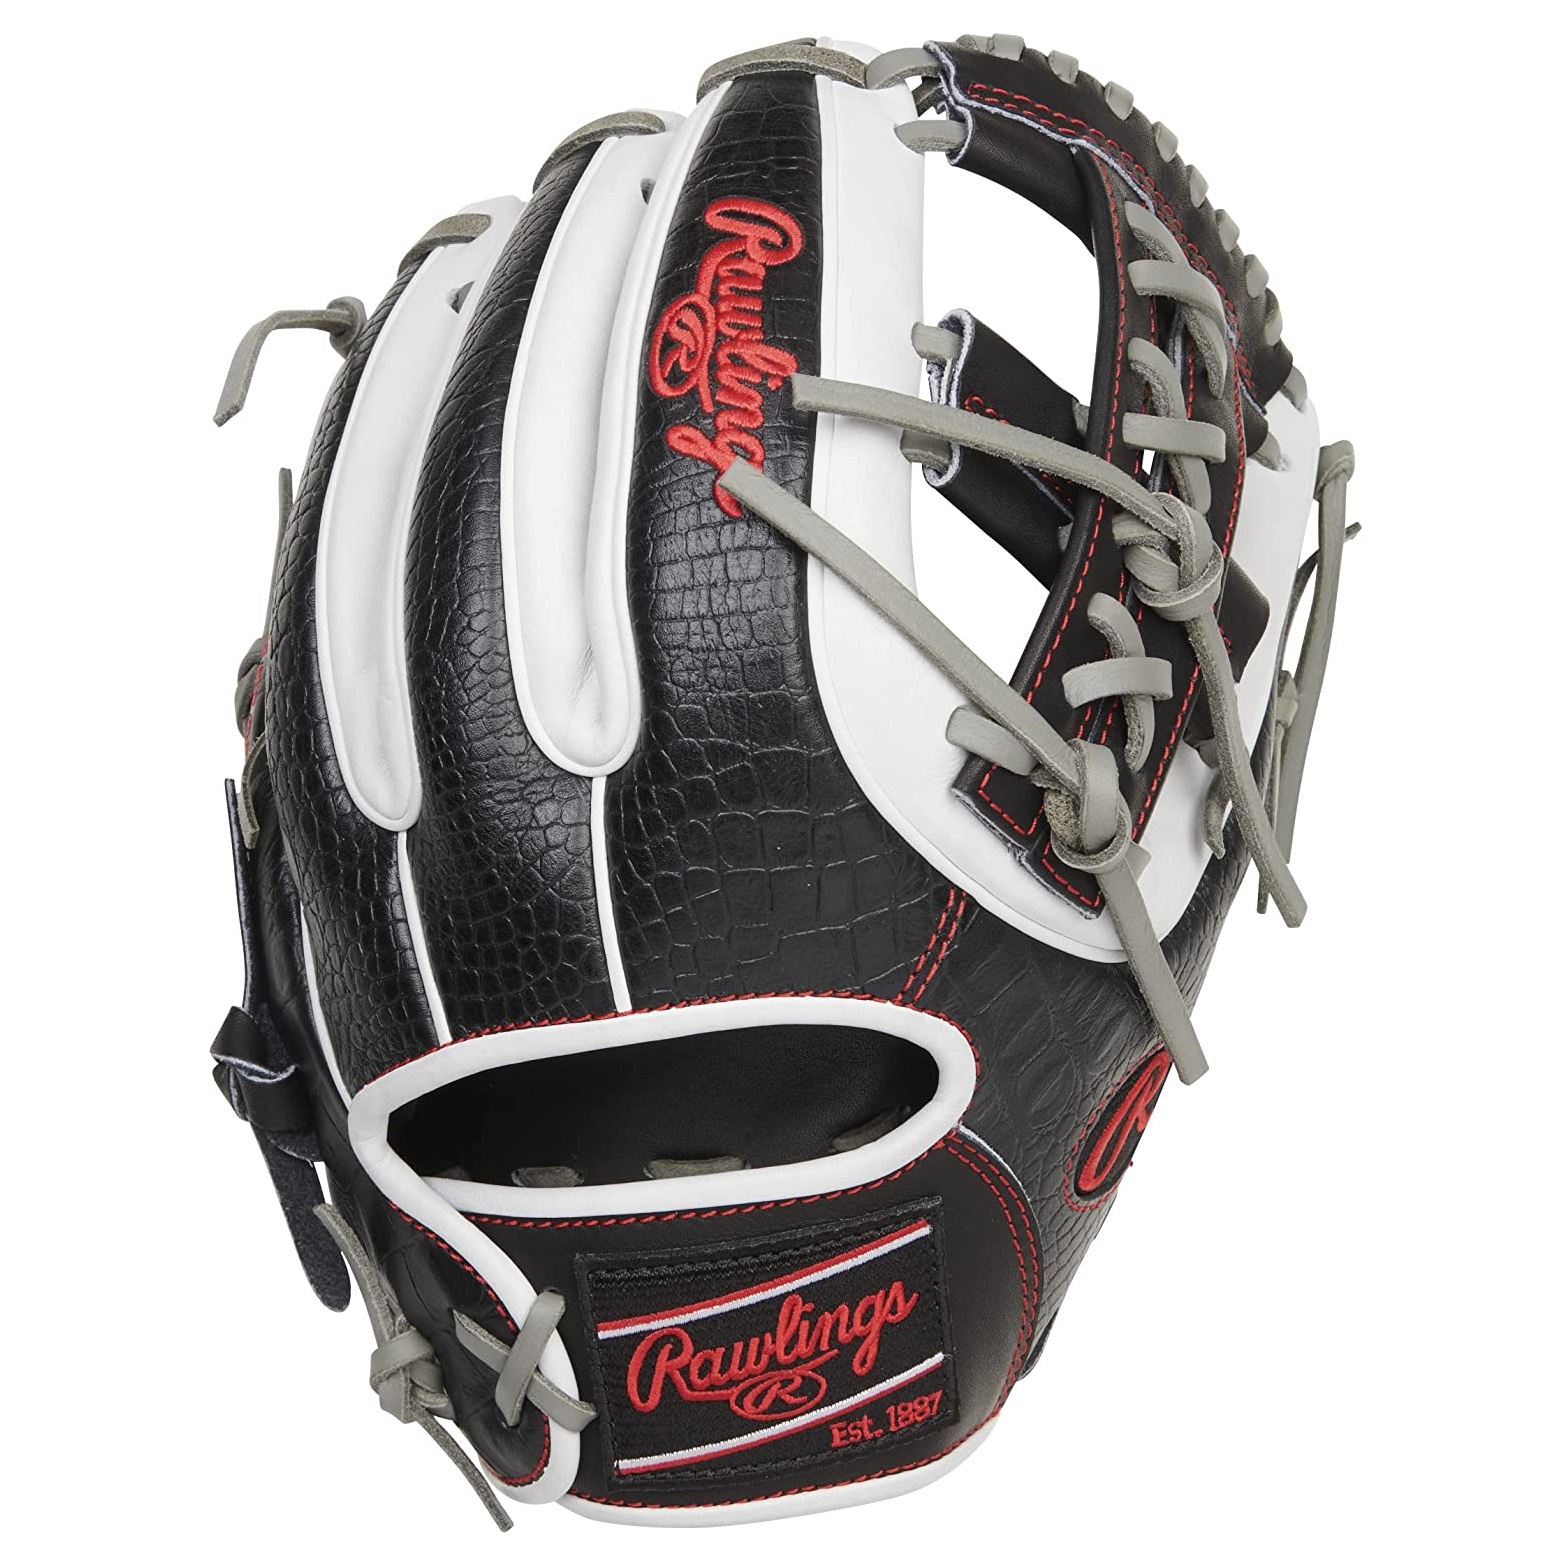           The Rawlings PRO314-32BW Heart of the Hide 11.5-inch Infield Glove is the ultimate tool for making spectacular plays on the diamond. Crafted from ultra-premium steerhide leather, this glove boasts legendary HOH performance features that will elevate your defense. The 11.5-inch pattern is lightweight and easy to maneuver, while the Split Single-Post web provides a spacious pocket with a unique look. The croc-embossed black shell is accented with striking scarlet and white, making this glove the envy of your team. When you take the field, make sure you have the right glove to succeed. Get your Rawlings Heart of the Hide 11.5-inch Infield Glove now and save more runs this season! Rawlings is trusted by more pros than any other brand, and when you put on this glove, you'll know why. Head to headbangersports.com to make it your next gamer today! With Rawlings, you know you're getting the mark of a pro. Product Features:  11.5-inch length 314 pattern, which offers a slightly deeper pocket than flat NP gloves and wider than 200 gloves, making it easy to scoop up grounders 60% player and 40% factory break-in Black and white colorway Conventional open back Deertanned cowhide palm lining and soft full-grain finger-back linings for improved comfort Constructed from top-grade U.S. steerhide Padded thumb sleeve Pro-grade leather laces for added durability and strength X-laced single post web Standard fit, with standard finger stalls and a 7-inch to 7.5-inch wrist opening Recommended for infielders (second base, shortstop, and third base) Thermoformed hand opening                     